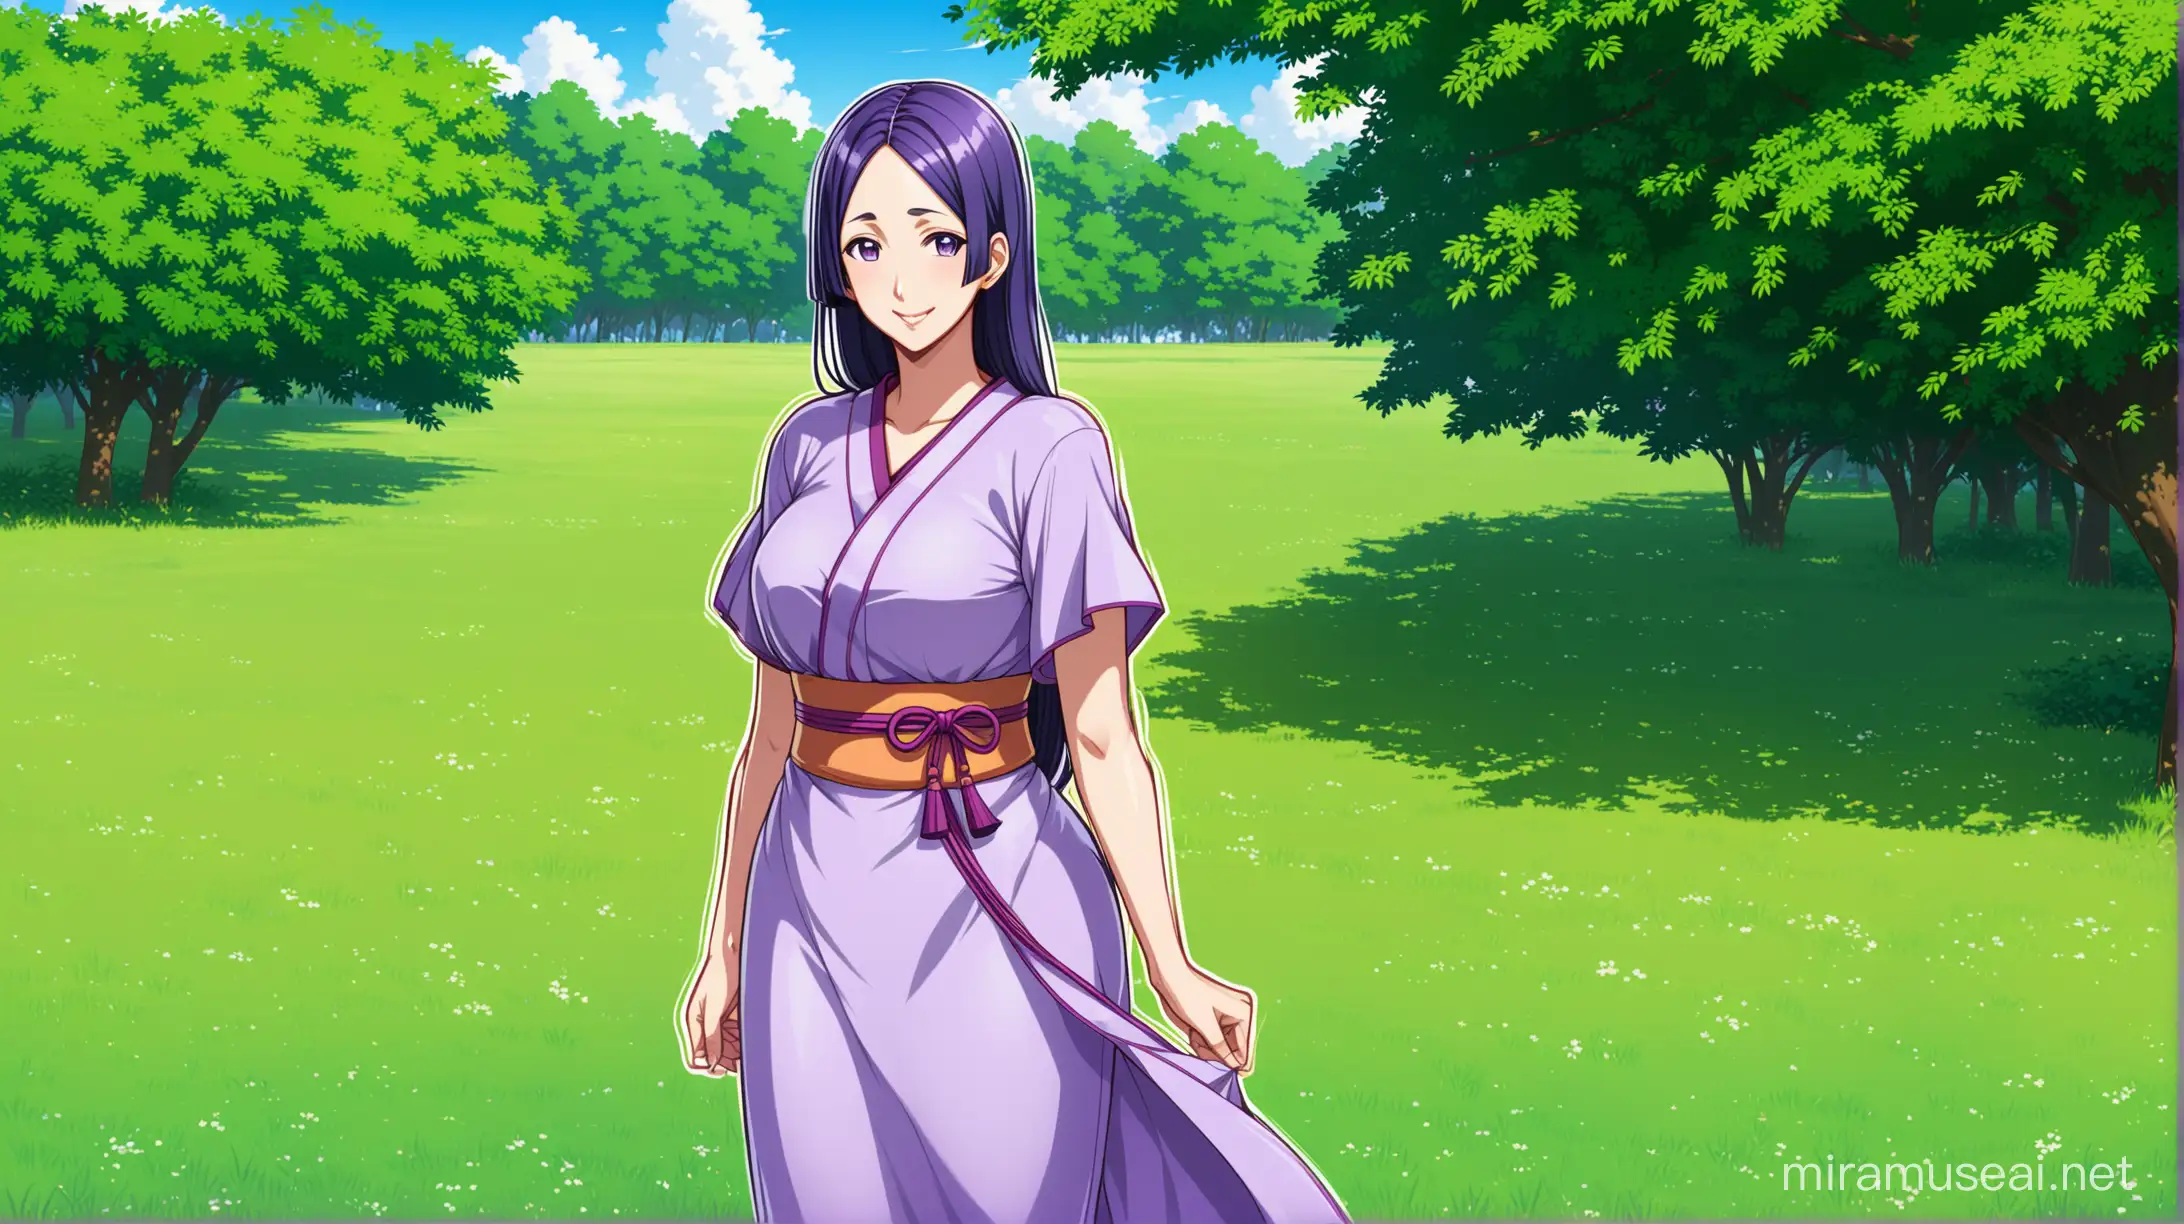 Draw the character Minamoto no Raikou standing in a grassy park while wearing a summer dress and smiling at the viewer